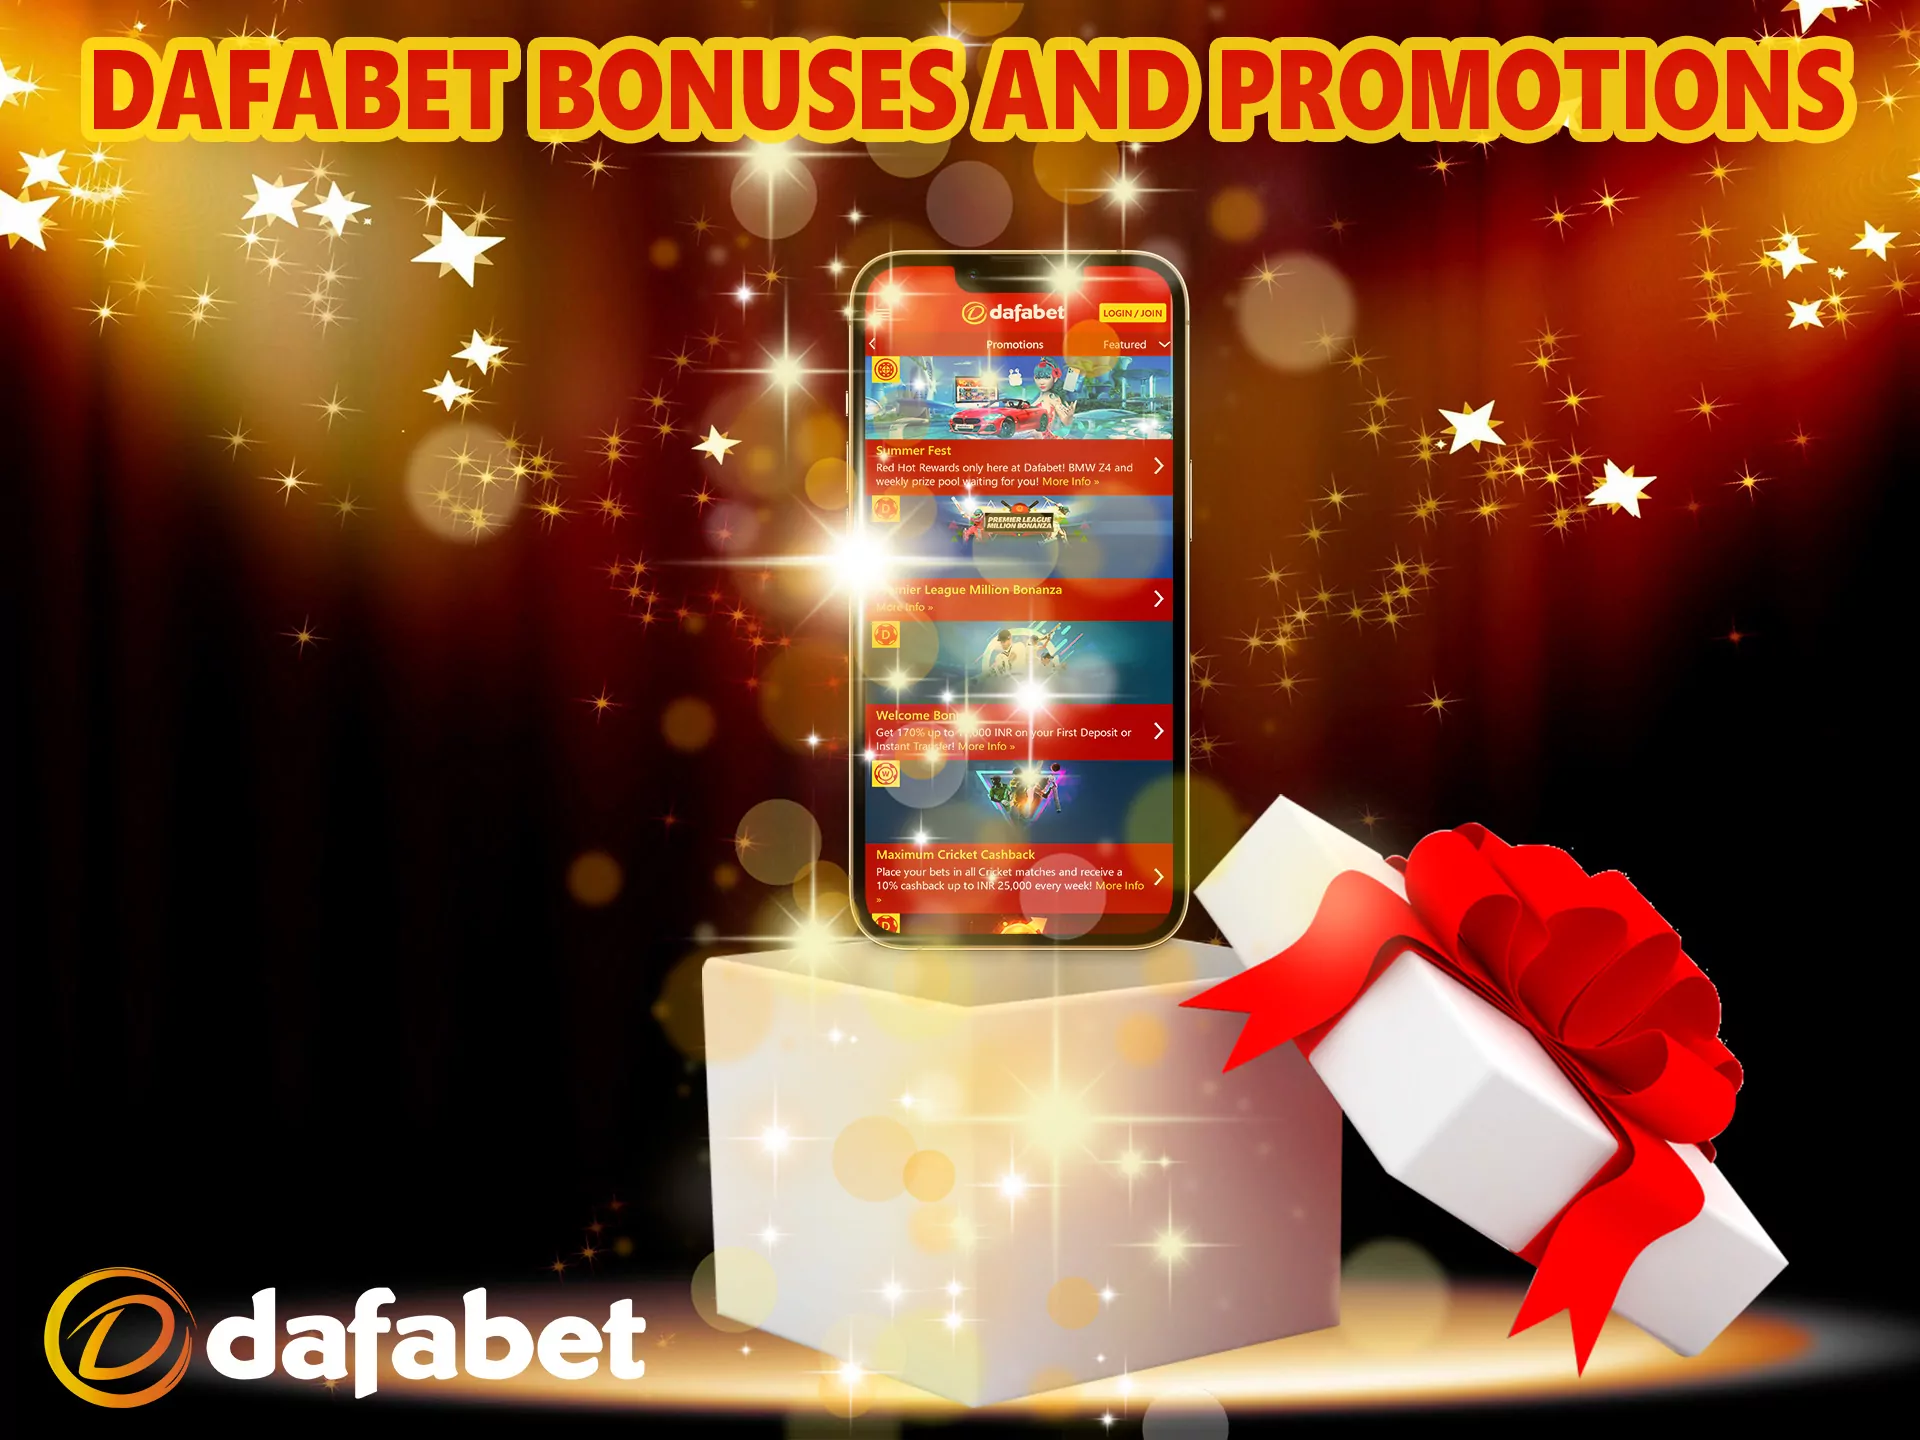 Dafabet has a large number of promotions and bonuses, this gives an easy start for beginners.